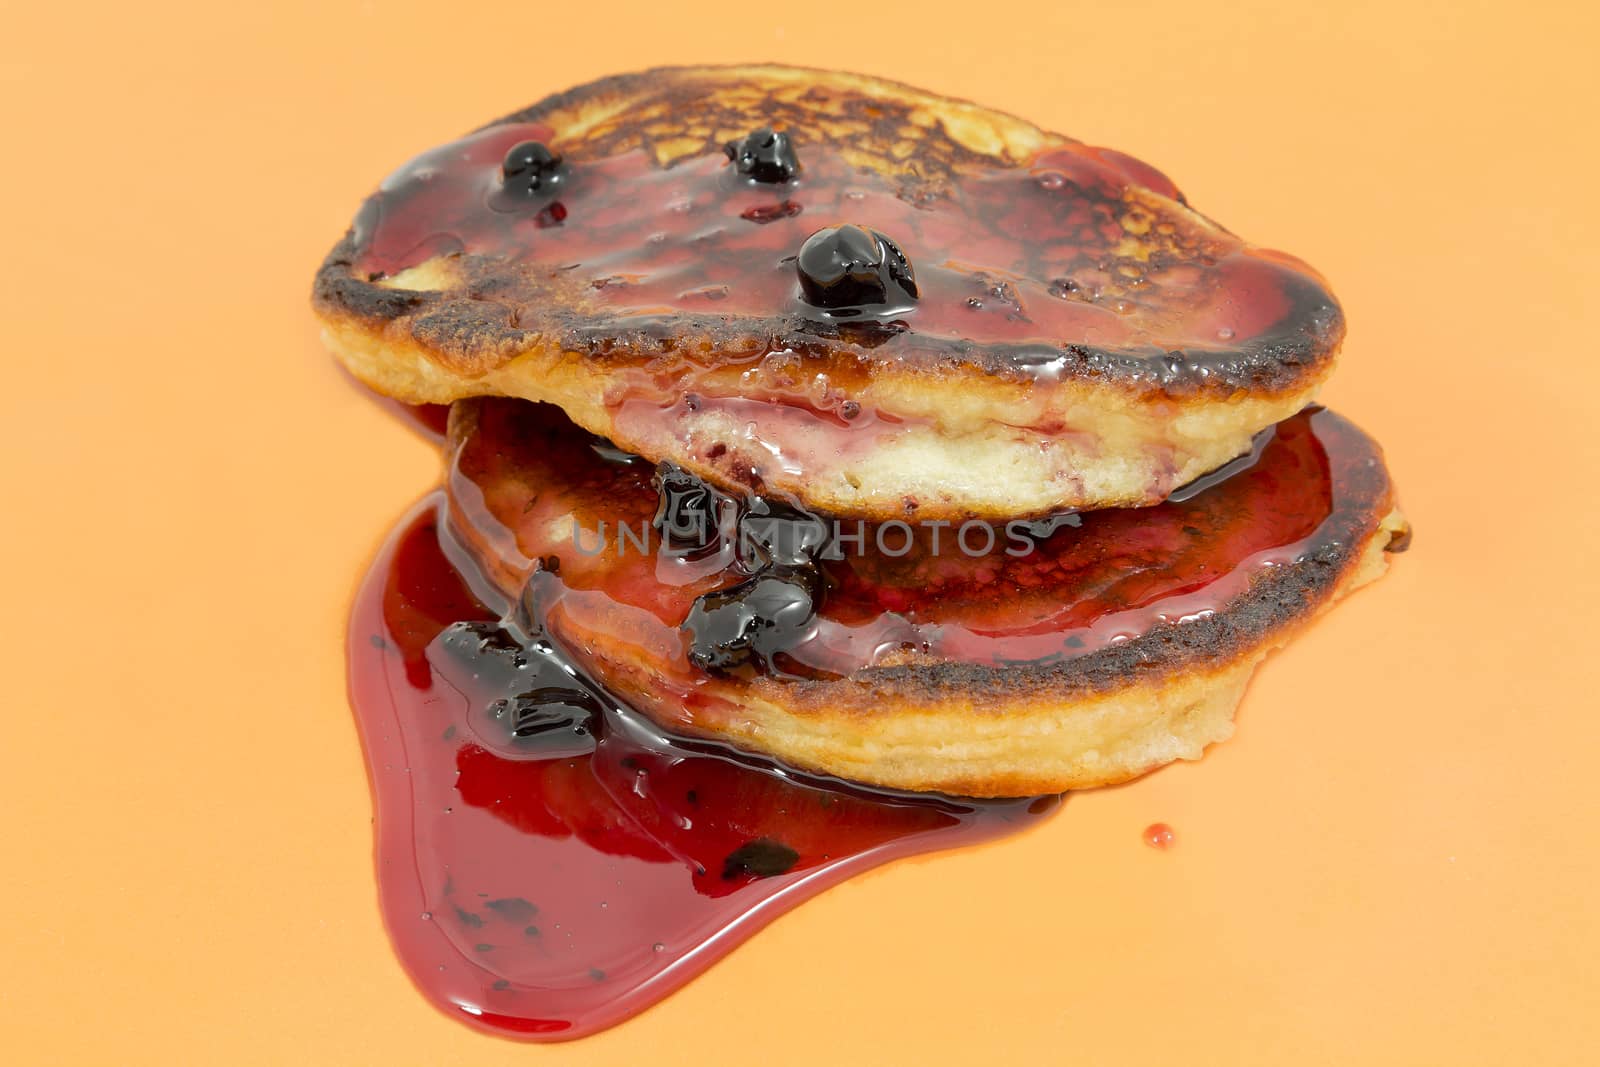 Pancakes with jam on a yellow background by sergeizubkov64